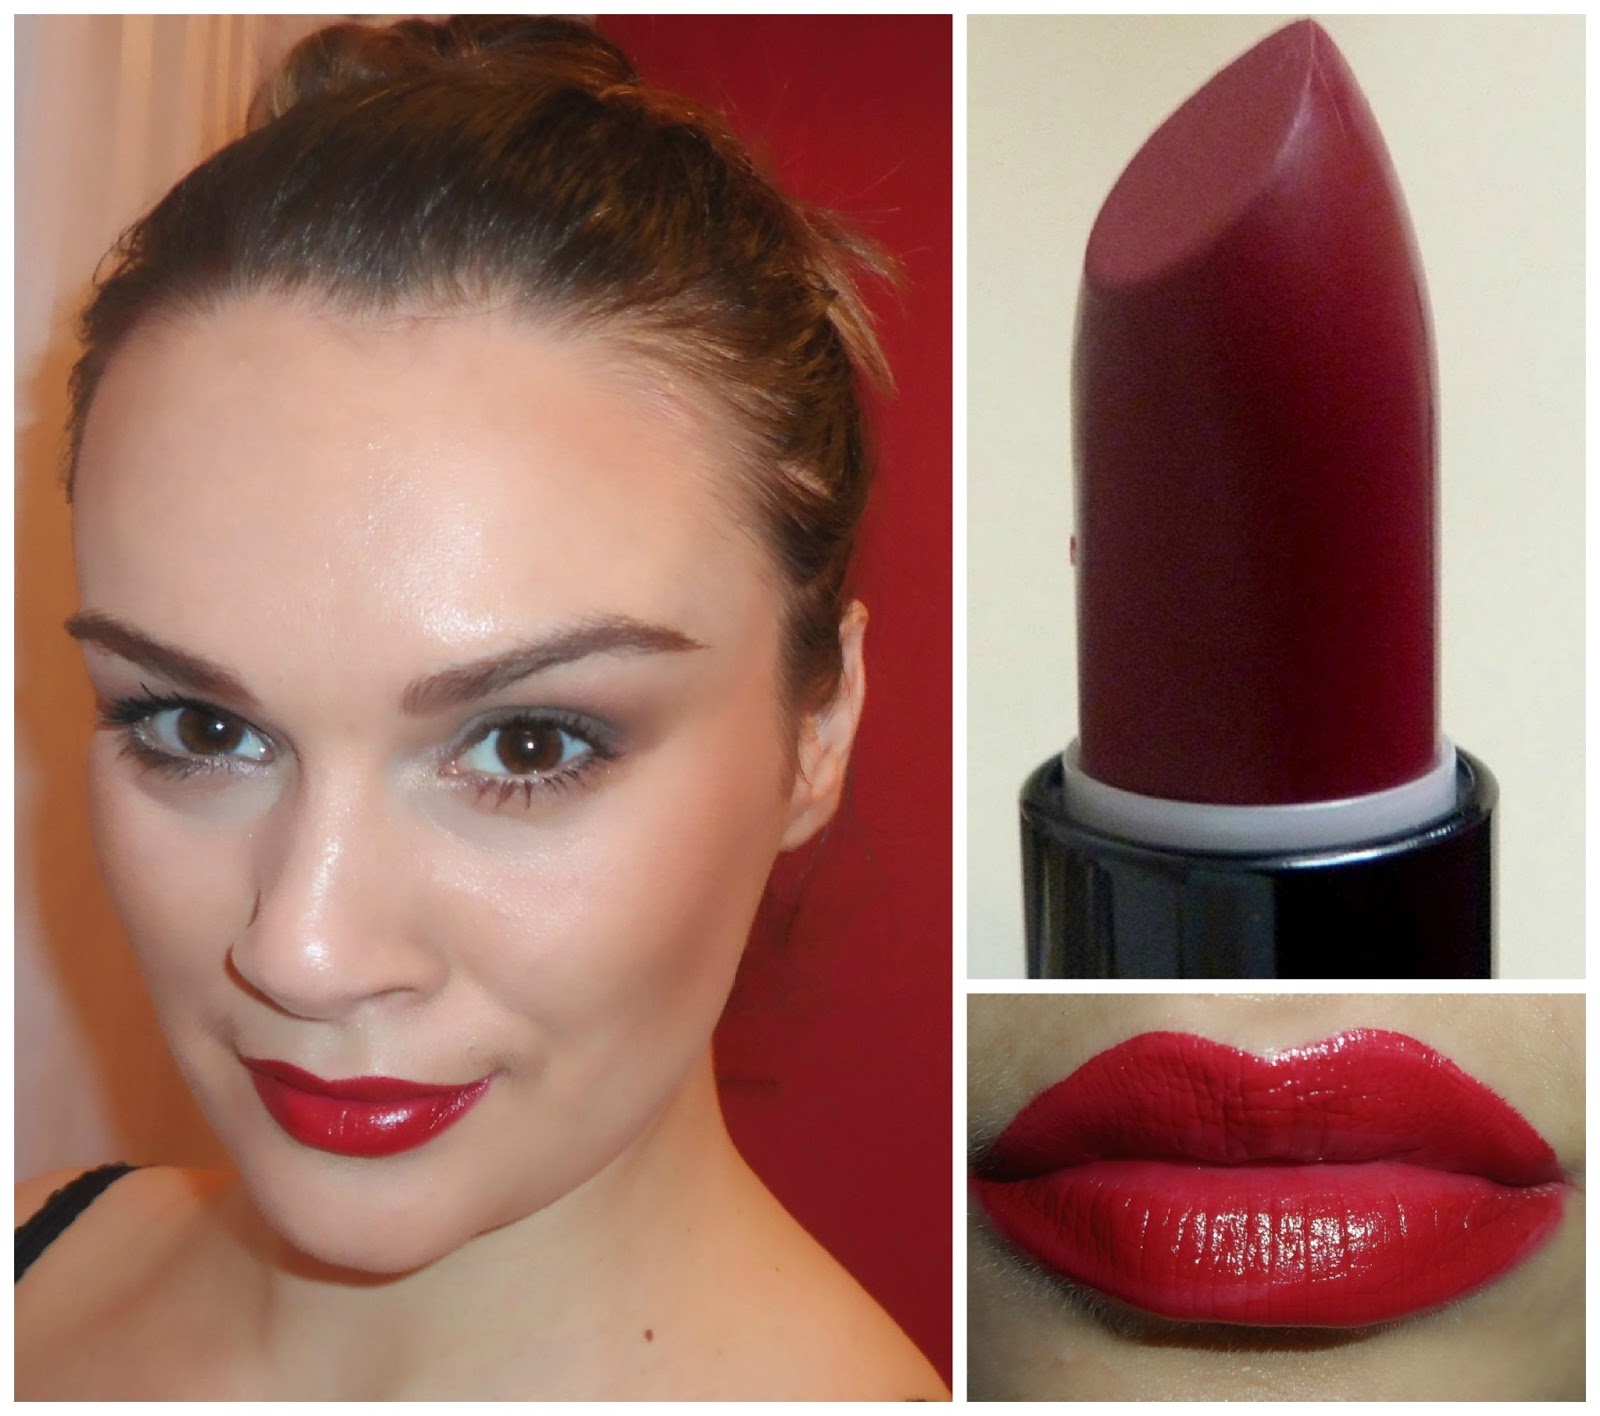 skyde ujævnheder Polering beautiful me plus you: Lasting Finish Lipstick by Kate Moss - Review